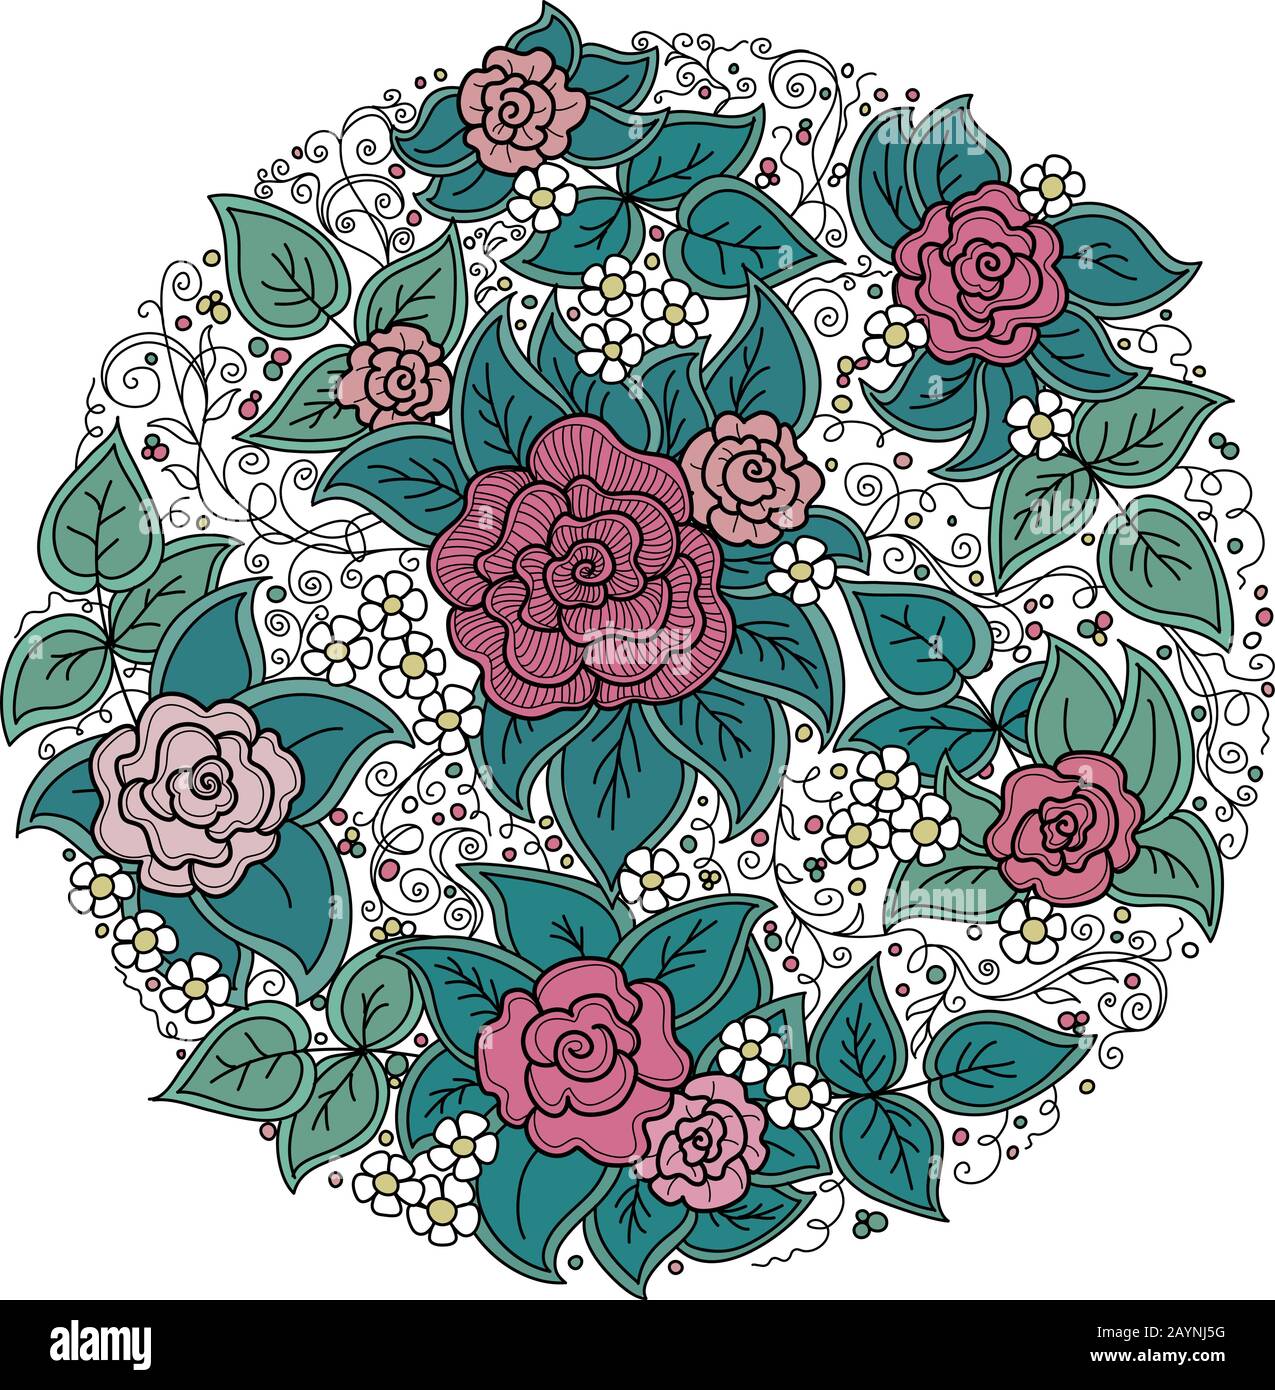 vector circle floral pattern with roses and leaves Stock Vector